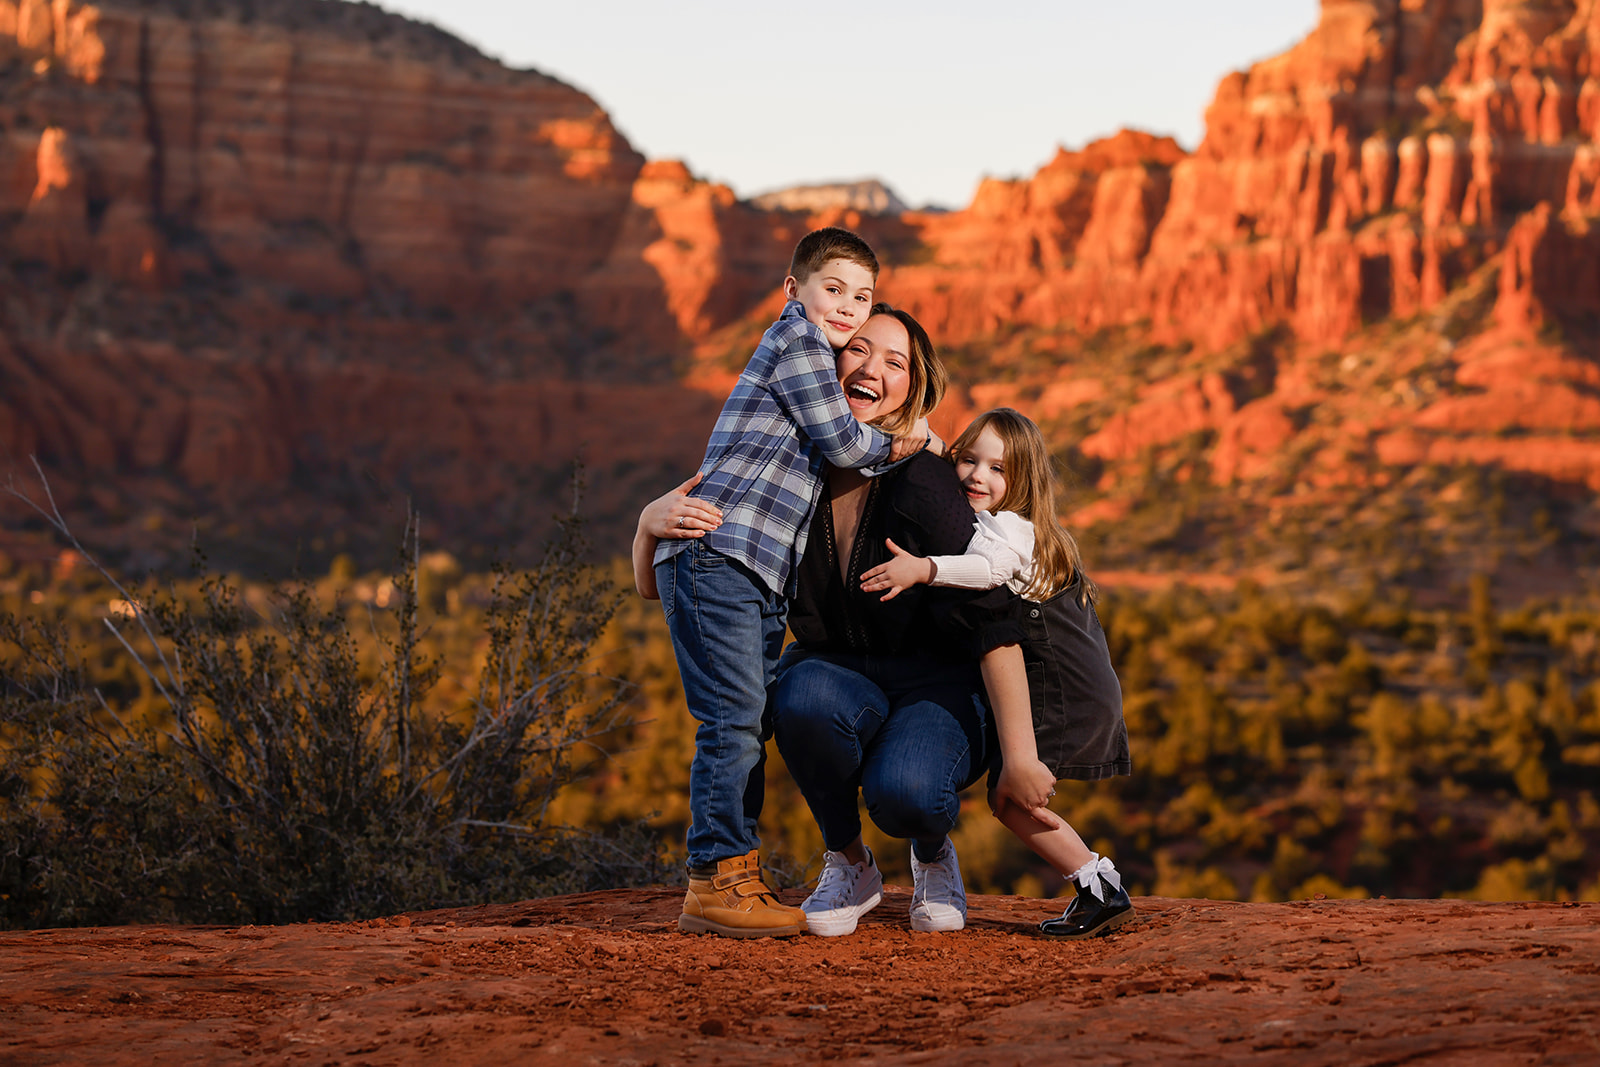 Sedona family portrait photographer, classic fun, natural outdoor photo session in the red rocks of Arizona, mother kids